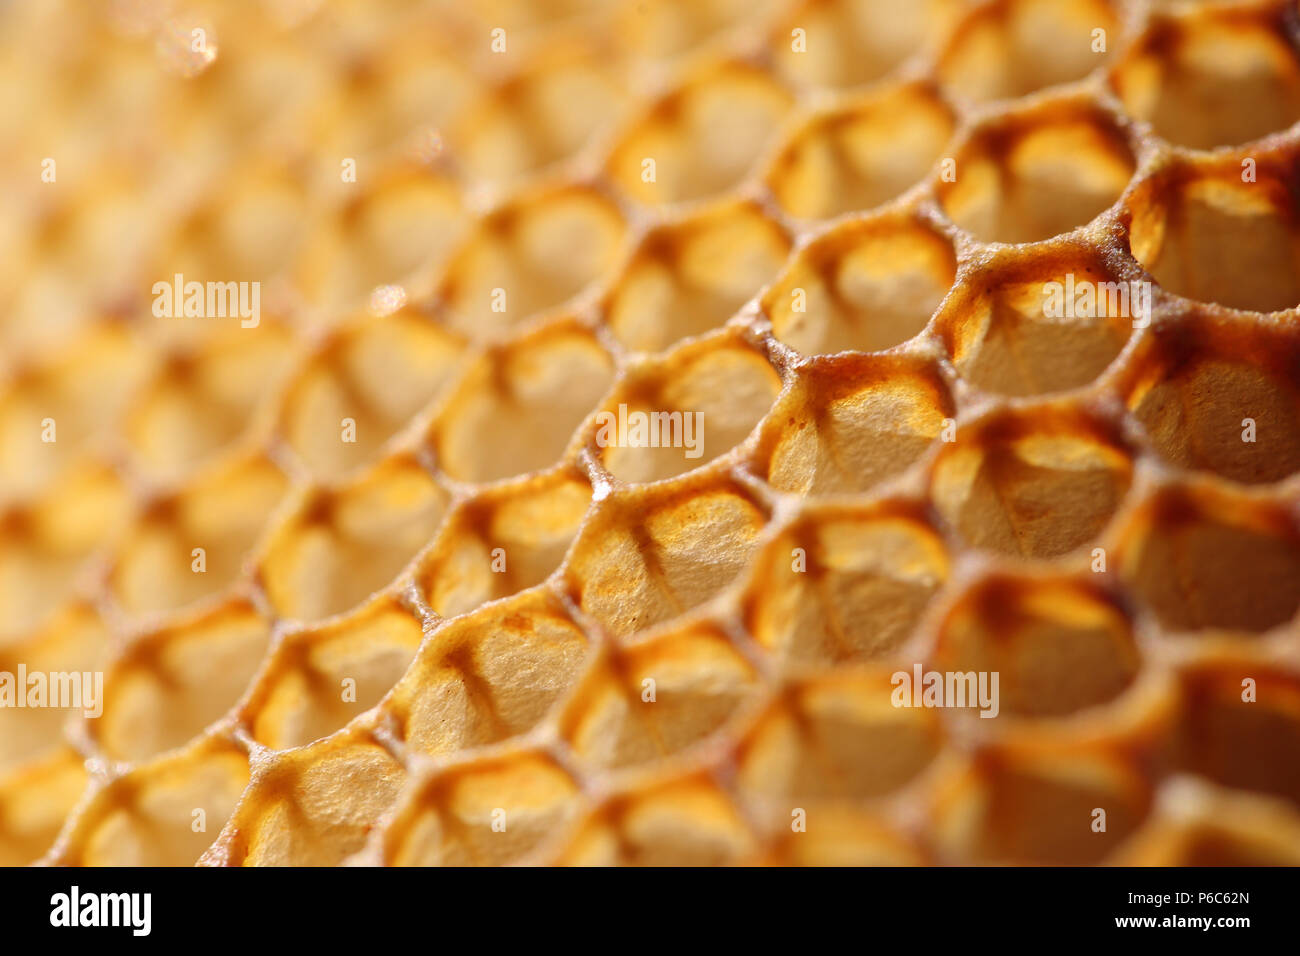 Berlin, Germany - Honeycomb trimmings of a honeycomb coated with propolis Stock Photo